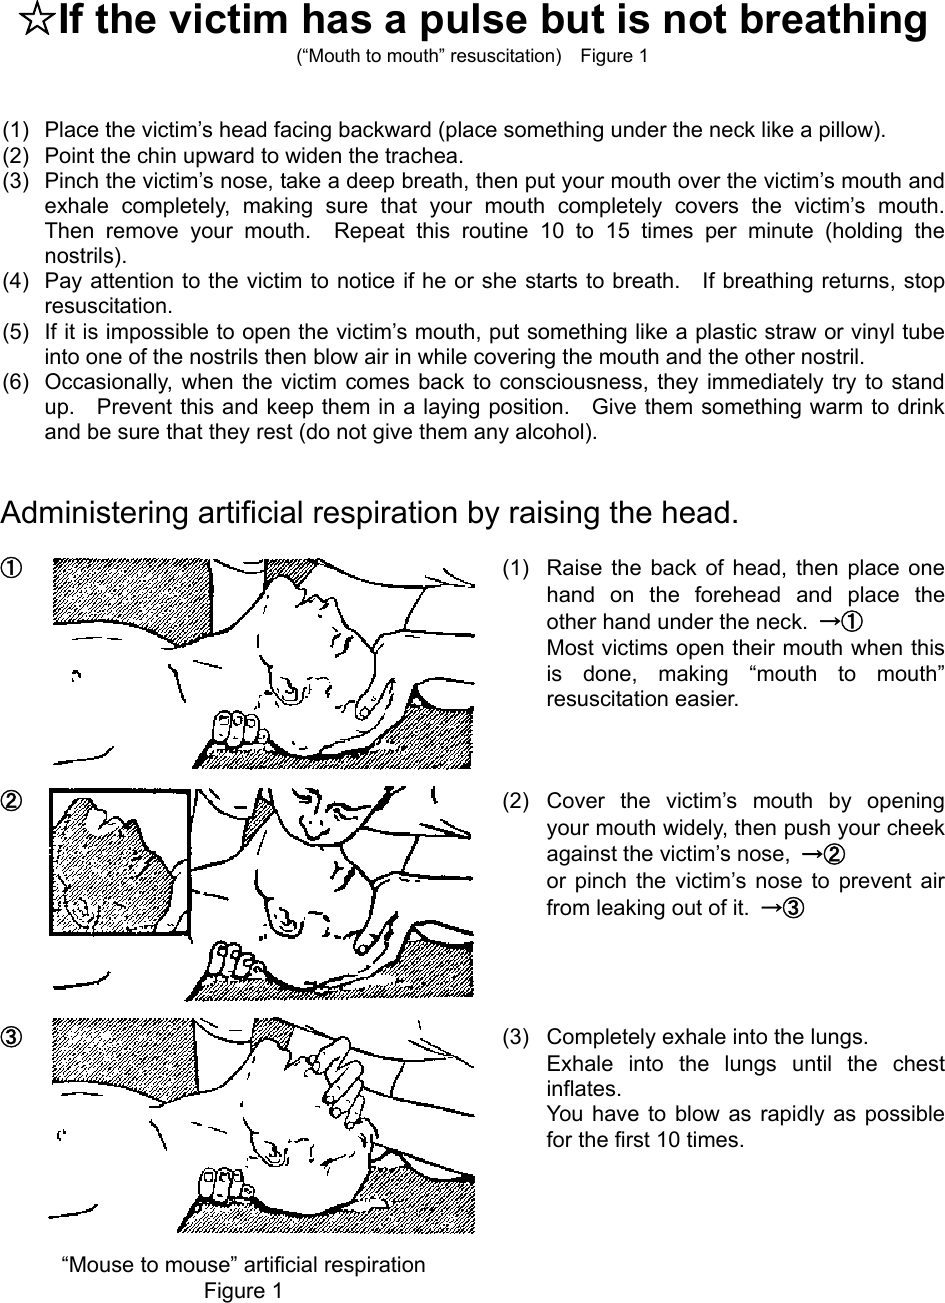  ☆If the victim has a pulse but is not breathing (“Mouth to mouth” resuscitation)    Figure 1   (1)  Place the victim’s head facing backward (place something under the neck like a pillow). (2)  Point the chin upward to widen the trachea. (3)  Pinch the victim’s nose, take a deep breath, then put your mouth over the victim’s mouth and exhale completely, making sure that your mouth completely covers the victim’s mouth.  Then remove your mouth.  Repeat this routine 10 to 15 times per minute (holding the nostrils). (4)  Pay attention to the victim to notice if he or she starts to breath.    If breathing returns, stop resuscitation. (5)  If it is impossible to open the victim’s mouth, put something like a plastic straw or vinyl tube into one of the nostrils then blow air in while covering the mouth and the other nostril. (6)  Occasionally, when the victim comes back to consciousness, they immediately try to stand up.   Prevent this and keep them in a laying position.    Give them something warm to drink and be sure that they rest (do not give them any alcohol).   Administering artificial respiration by raising the head.  ① (1)  Raise the back of head, then place one hand on the forehead and place the other hand under the neck.  →①  Most victims open their mouth when this is done, making “mouth to mouth” resuscitation easier.    ②  (2) Cover the victim’s mouth by opening your mouth widely, then push your cheek against the victim’s nose,  →② or pinch the victim’s nose to prevent air from leaking out of it.  →③     ③ (3)  Completely exhale into the lungs.   Exhale into the lungs until the chest inflates. You have to blow as rapidly as possible for the first 10 times.     “Mouse to mouse” artificial respiration Figure 1   